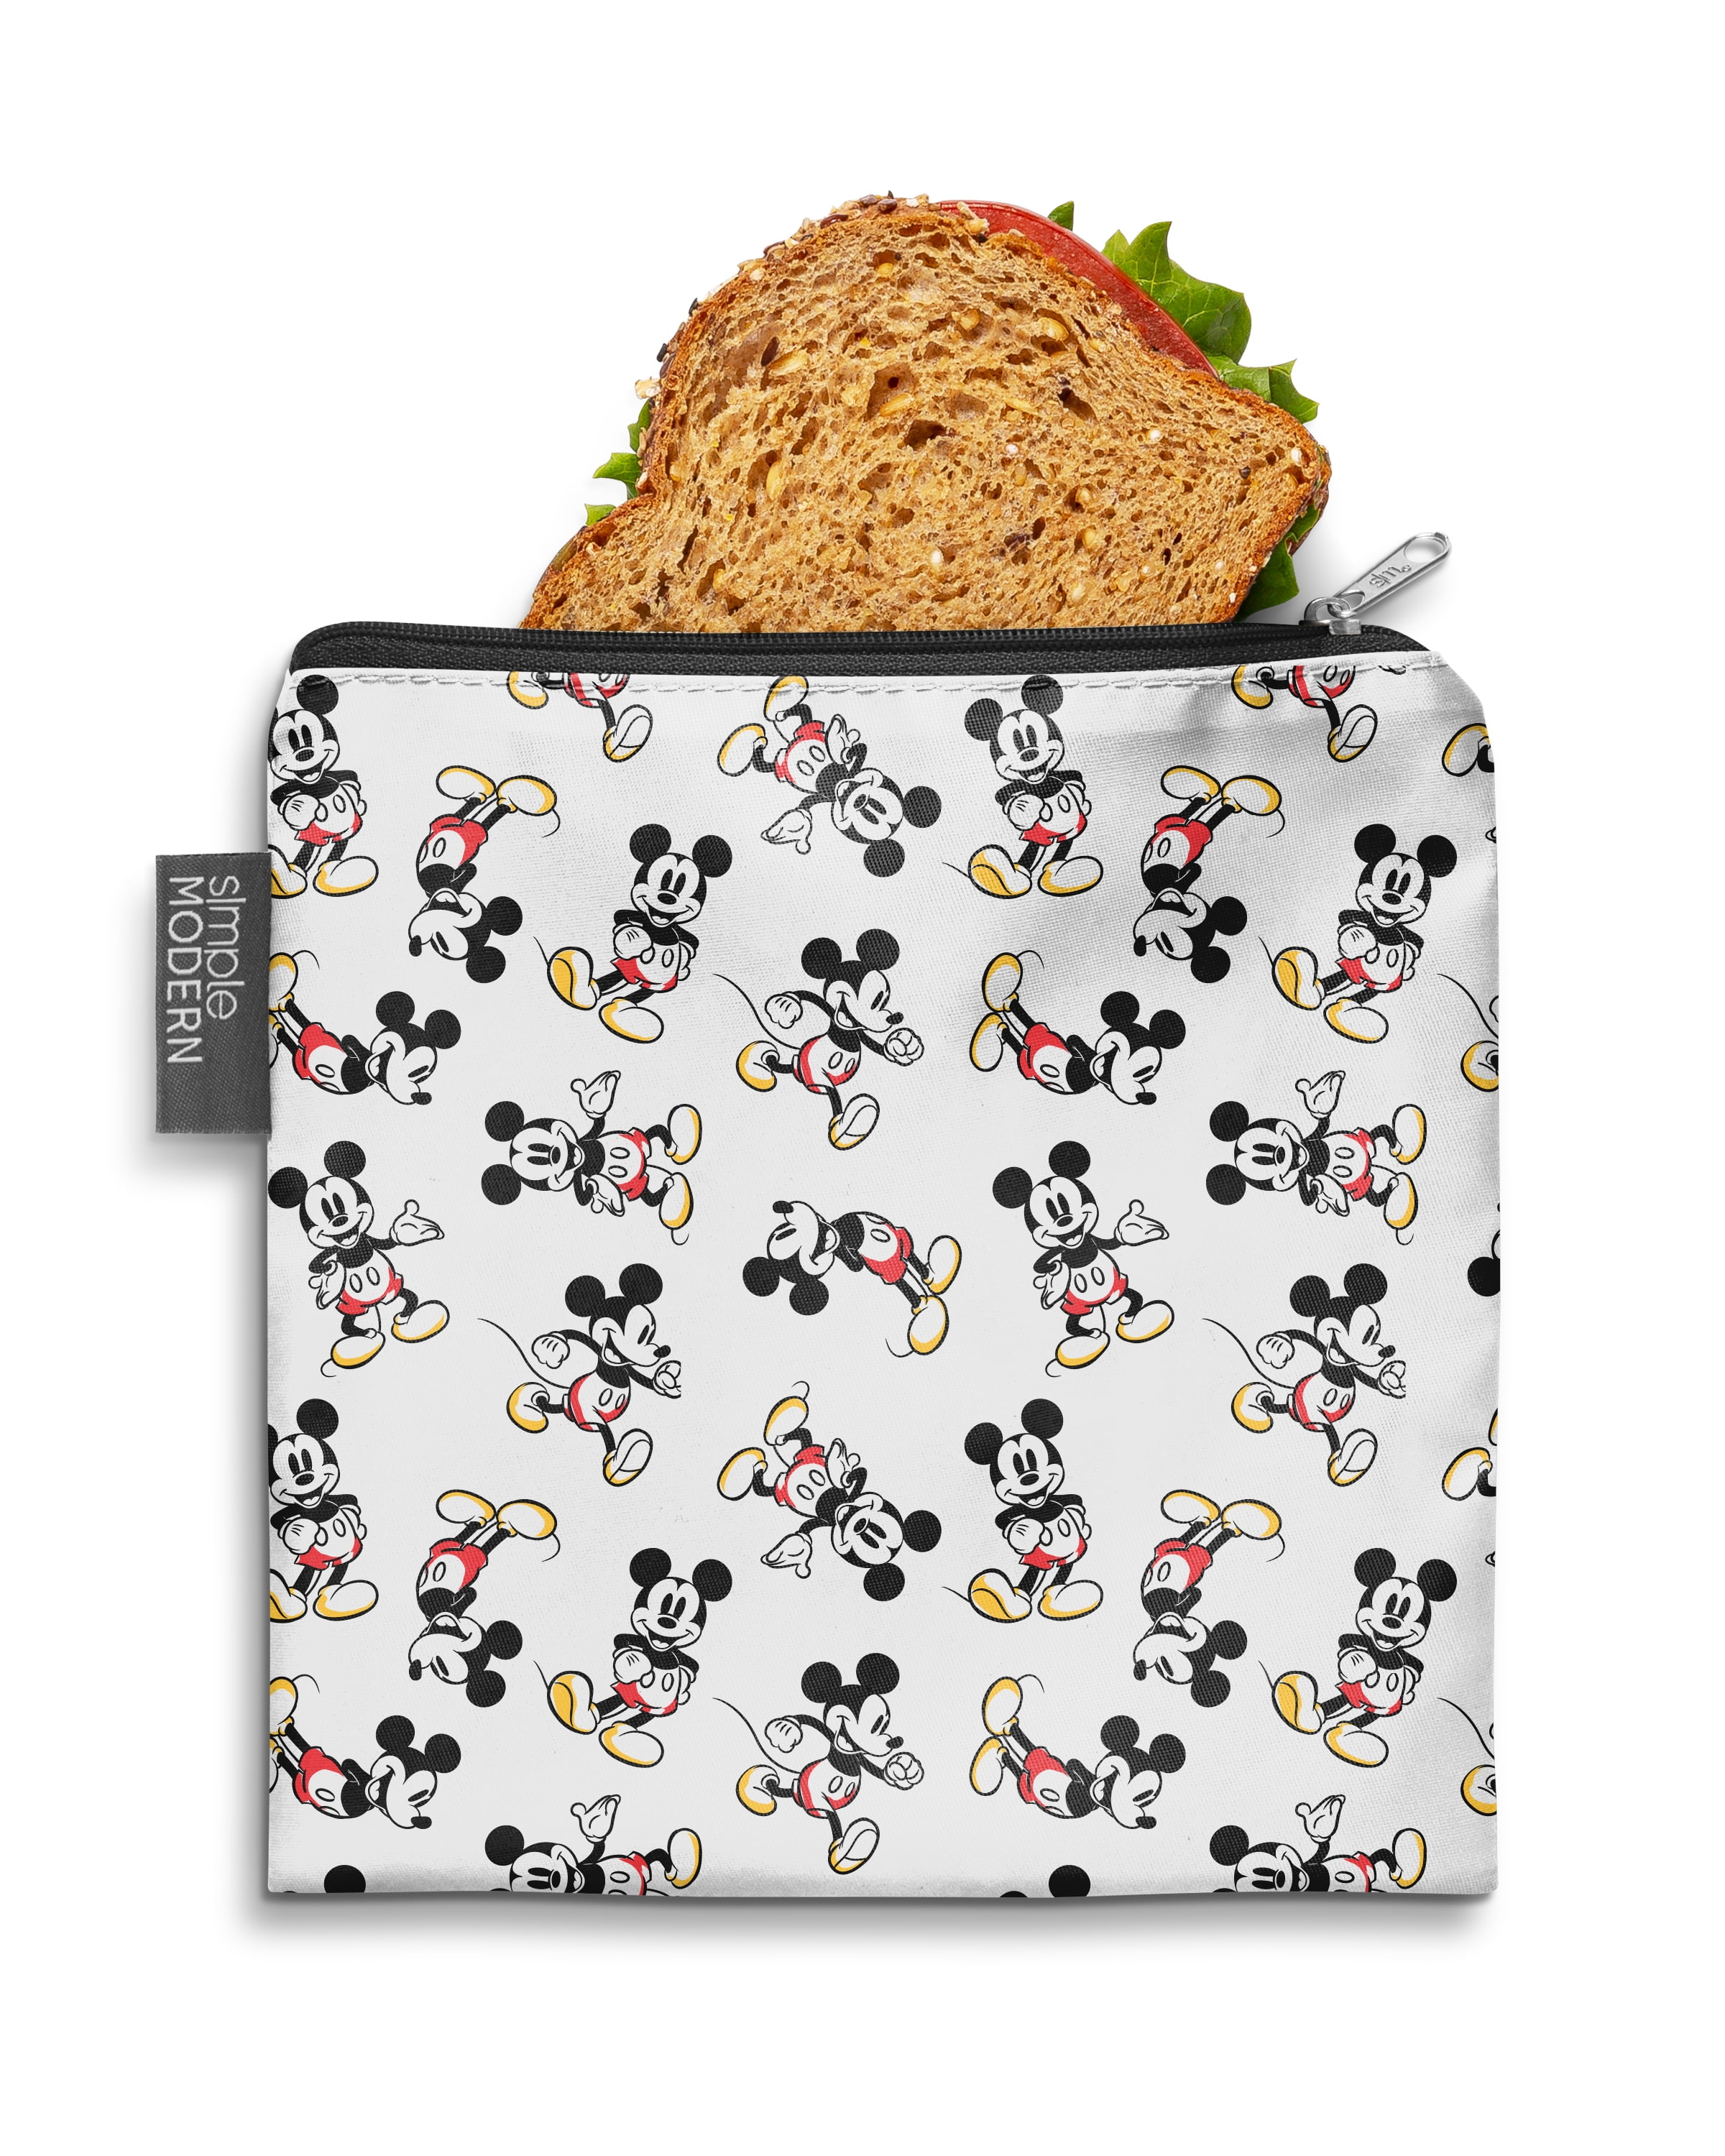 Reuseable Eco-Friendly Set of Snack and Sandwich Bags in Gray Fox Fabric